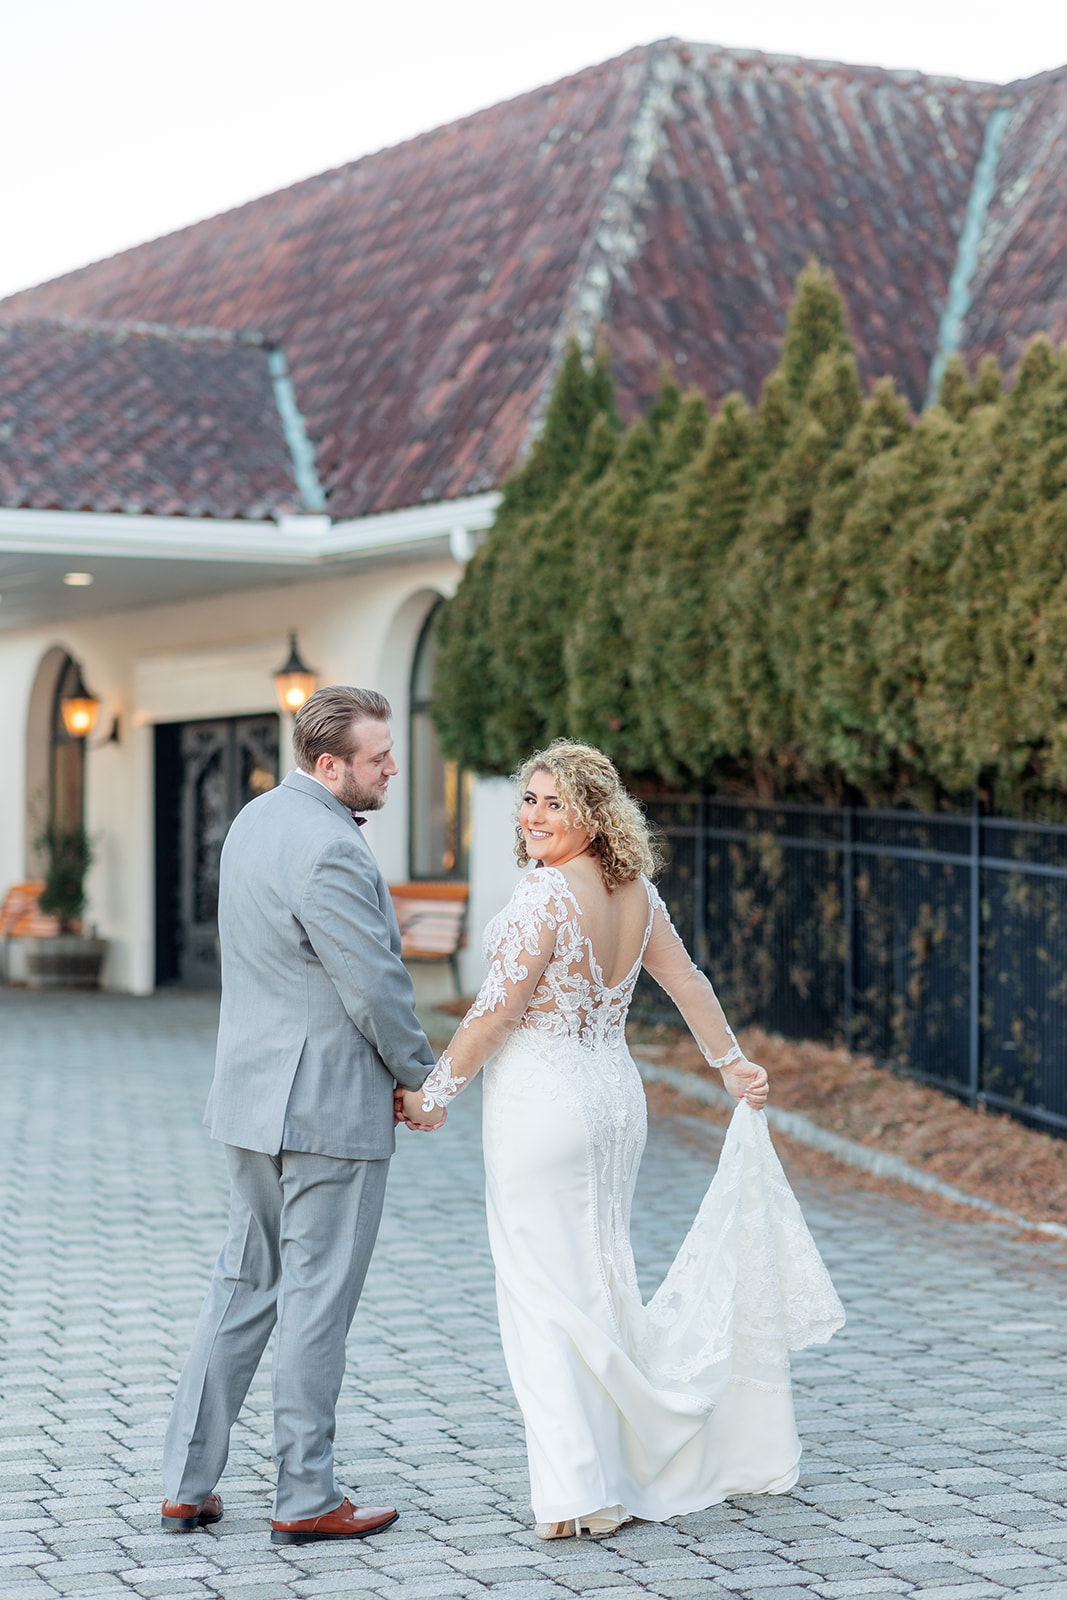 Newlyweds hold hands while walking on a grey brick paved driveway to their wedding reception